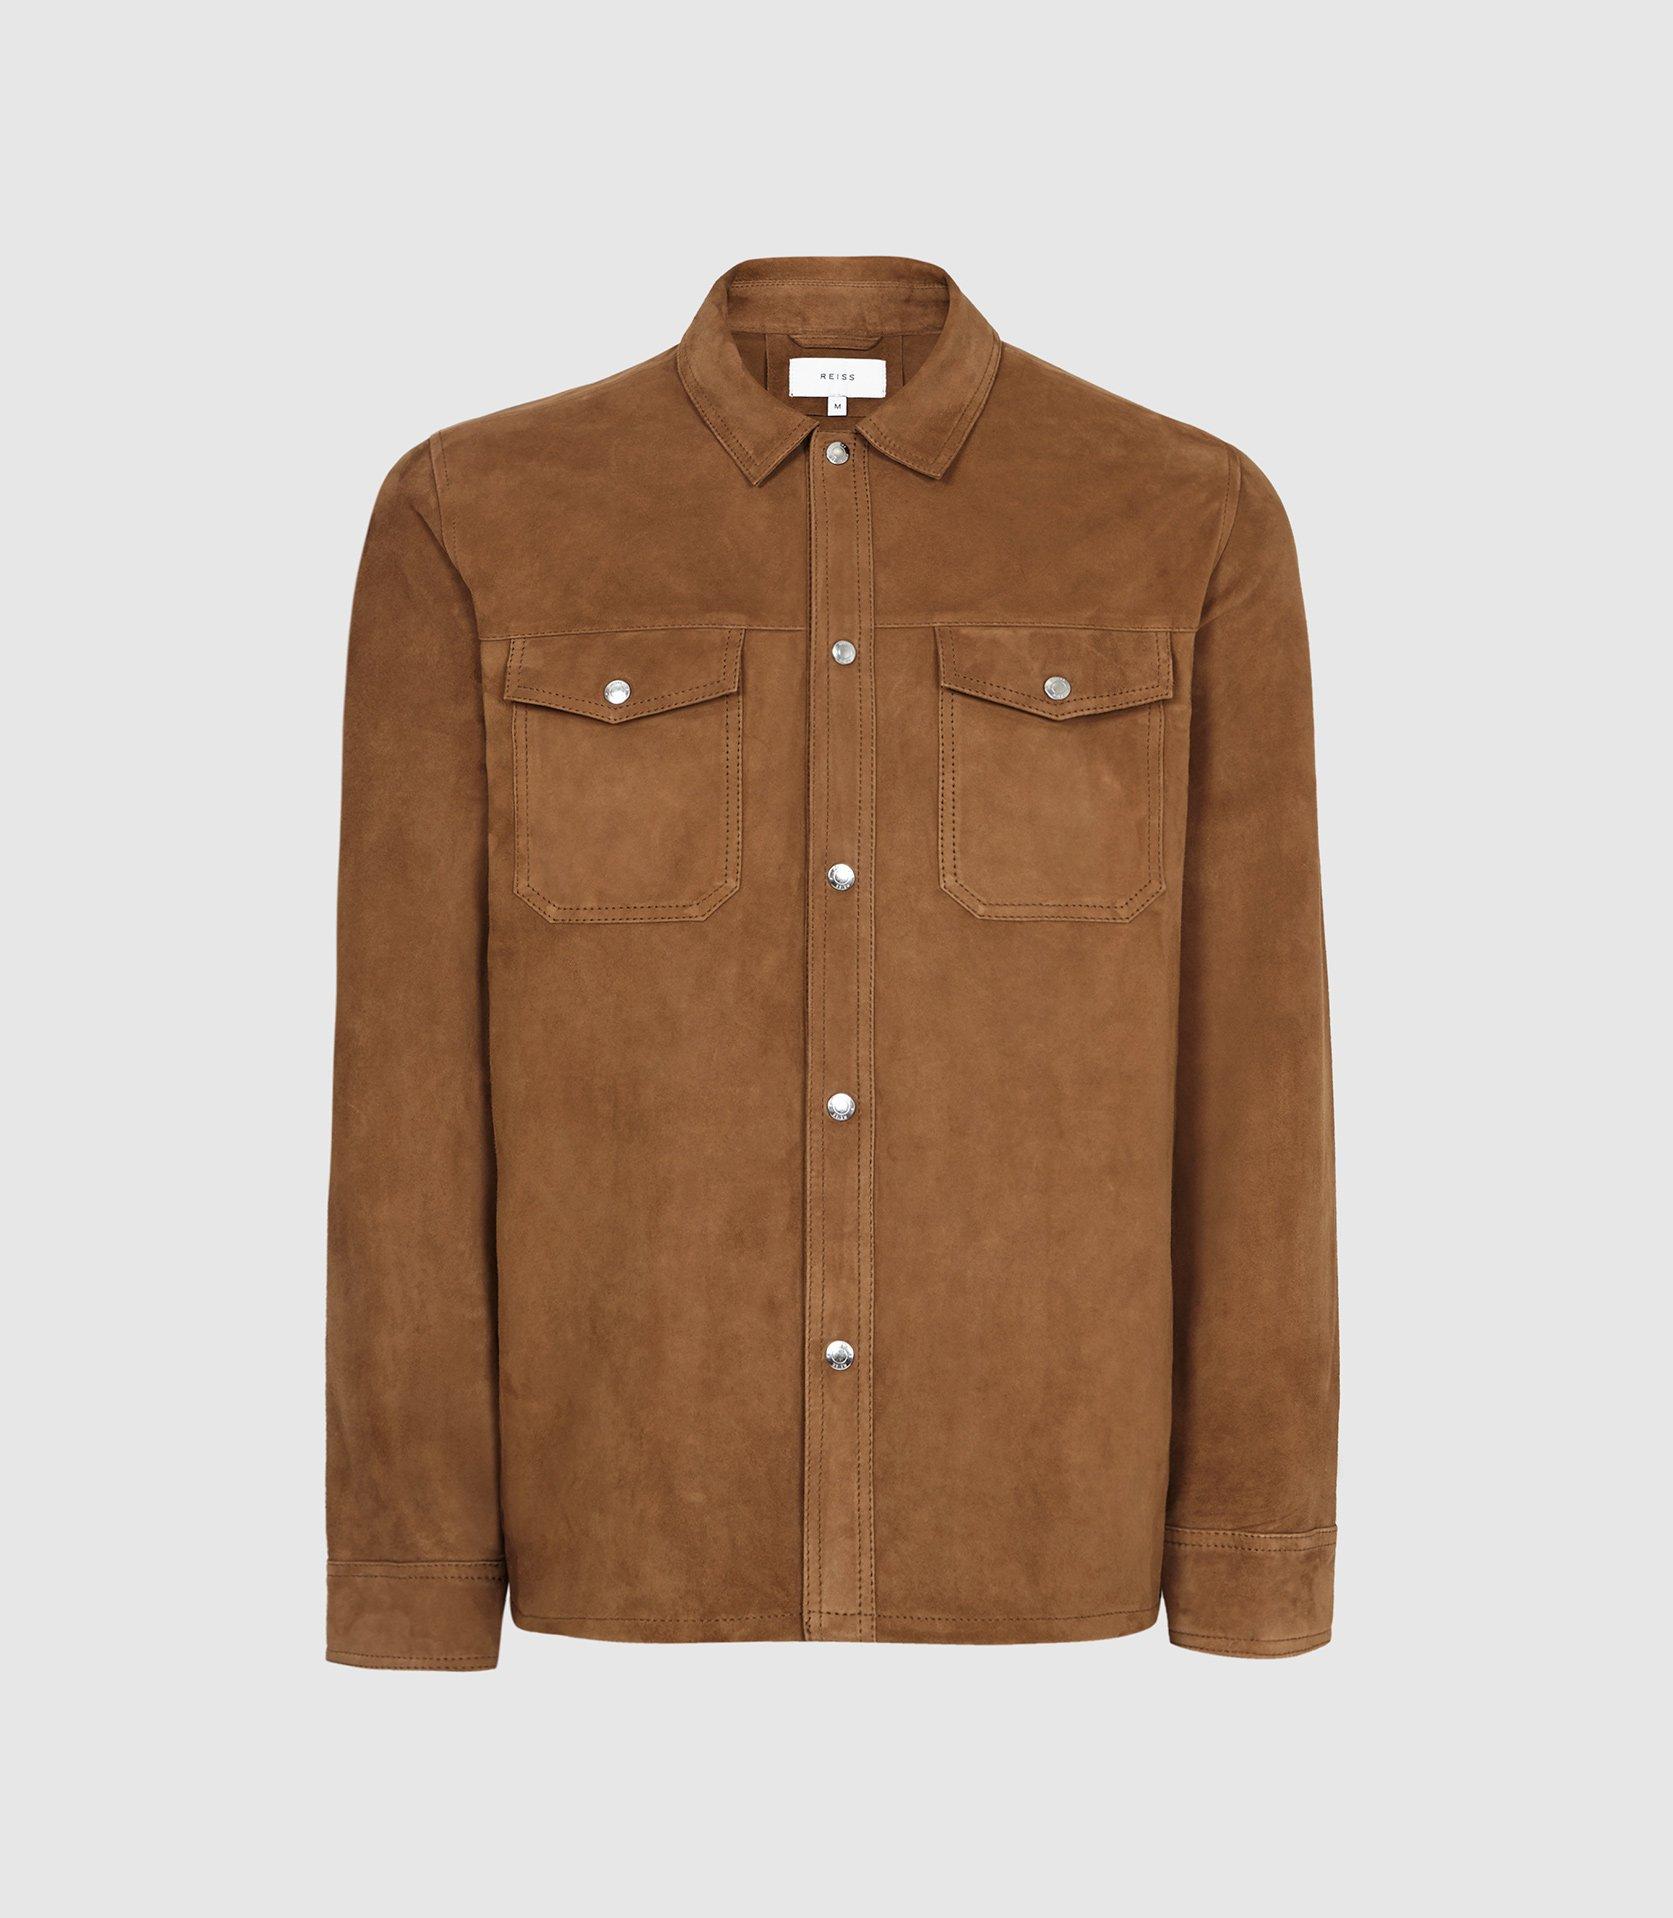 Reiss Suede Overshirt in Tobacco (Brown) for Men - Lyst